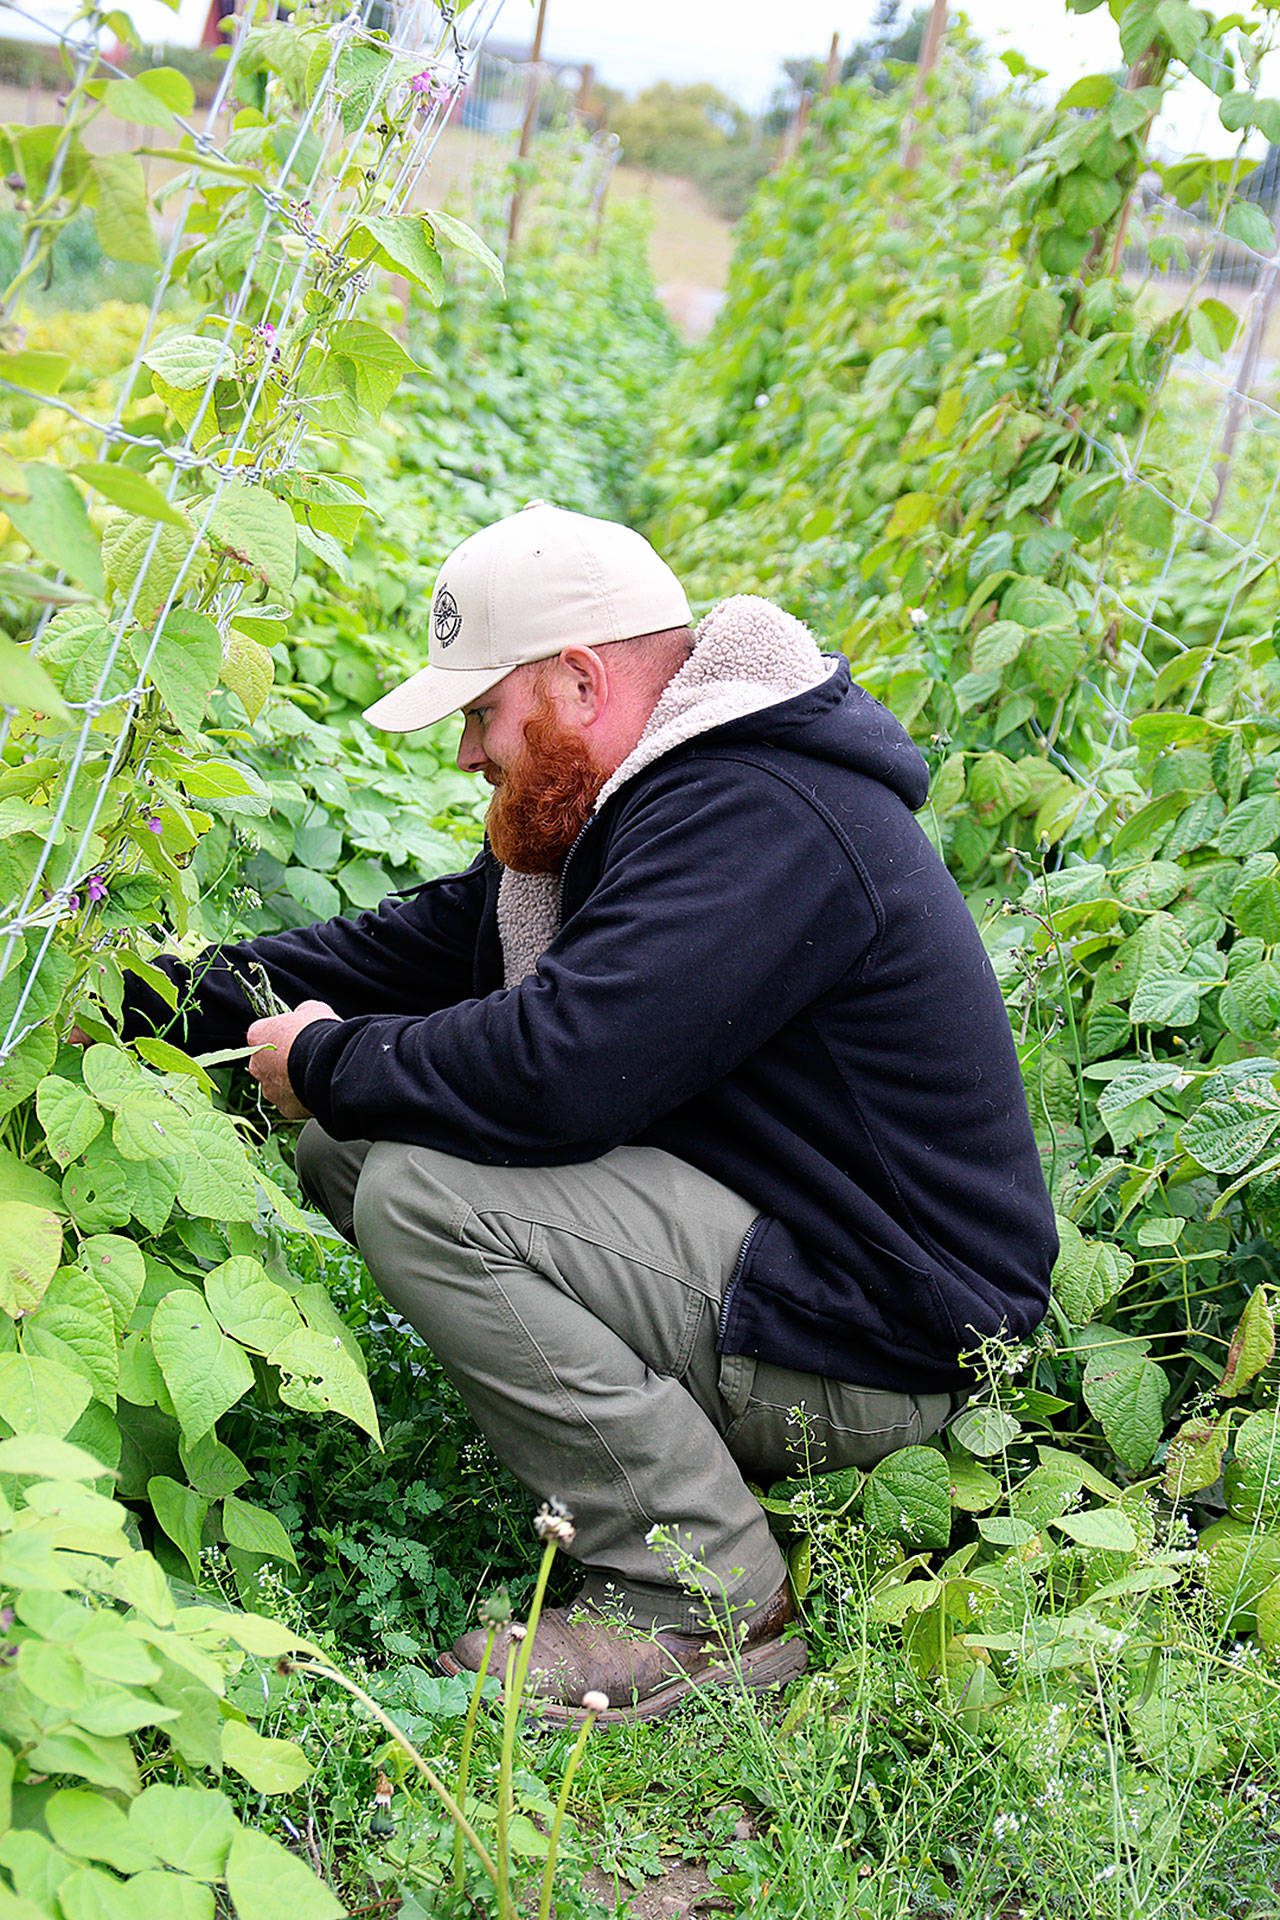 Kyle Flack, of Bell’s Farm, harvests some beans from the garden. The Farm’s produce will be featured at Langley and Coupeville farmers markets, the Harvest Faire, Sept. 30 at Greenbank Farm, and in dishes served at Christopher’s on Whidbey during Whidbey Island Grown Week, Sept. 28 to Oct. 7. Photo by Laura Guido/Whidbey News Group